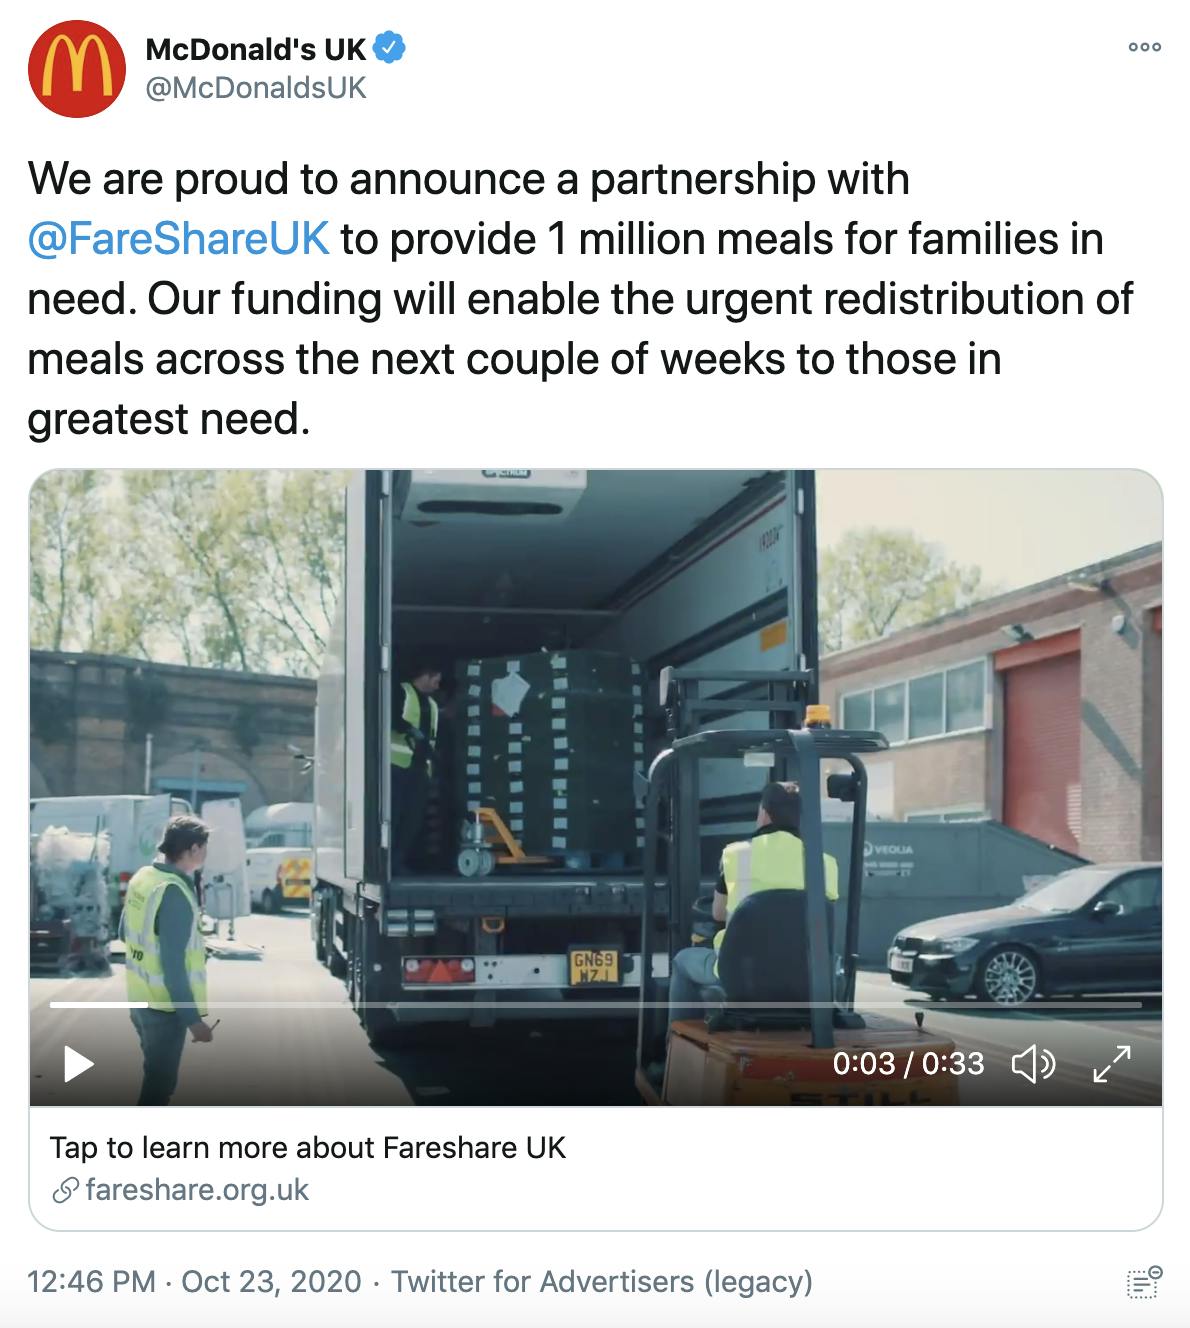 'We are proud to announce a partnership with @FareShareUK to provide 1 million meals for families in need. Our funding will enable the urgent redistribution of meals across the next couple of weeks to those in greatest need.' screenshot of people unloading a lorry